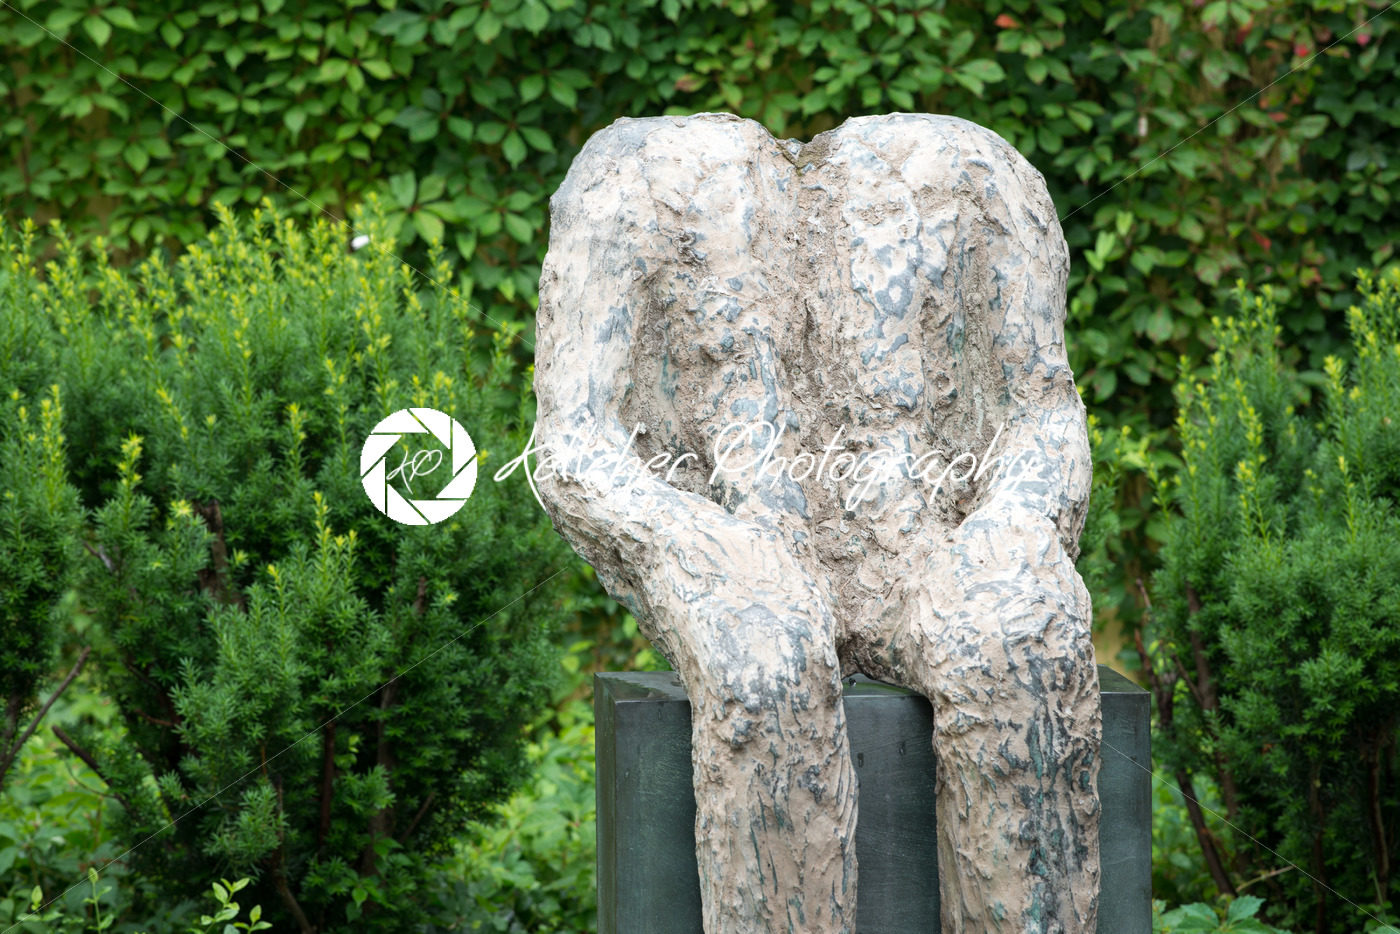 TRENTON, NJ – JUNE 17, 2017: Sage by Magdalena Abakanowicz at Grounds for Sculpture - Kelleher Photography Store